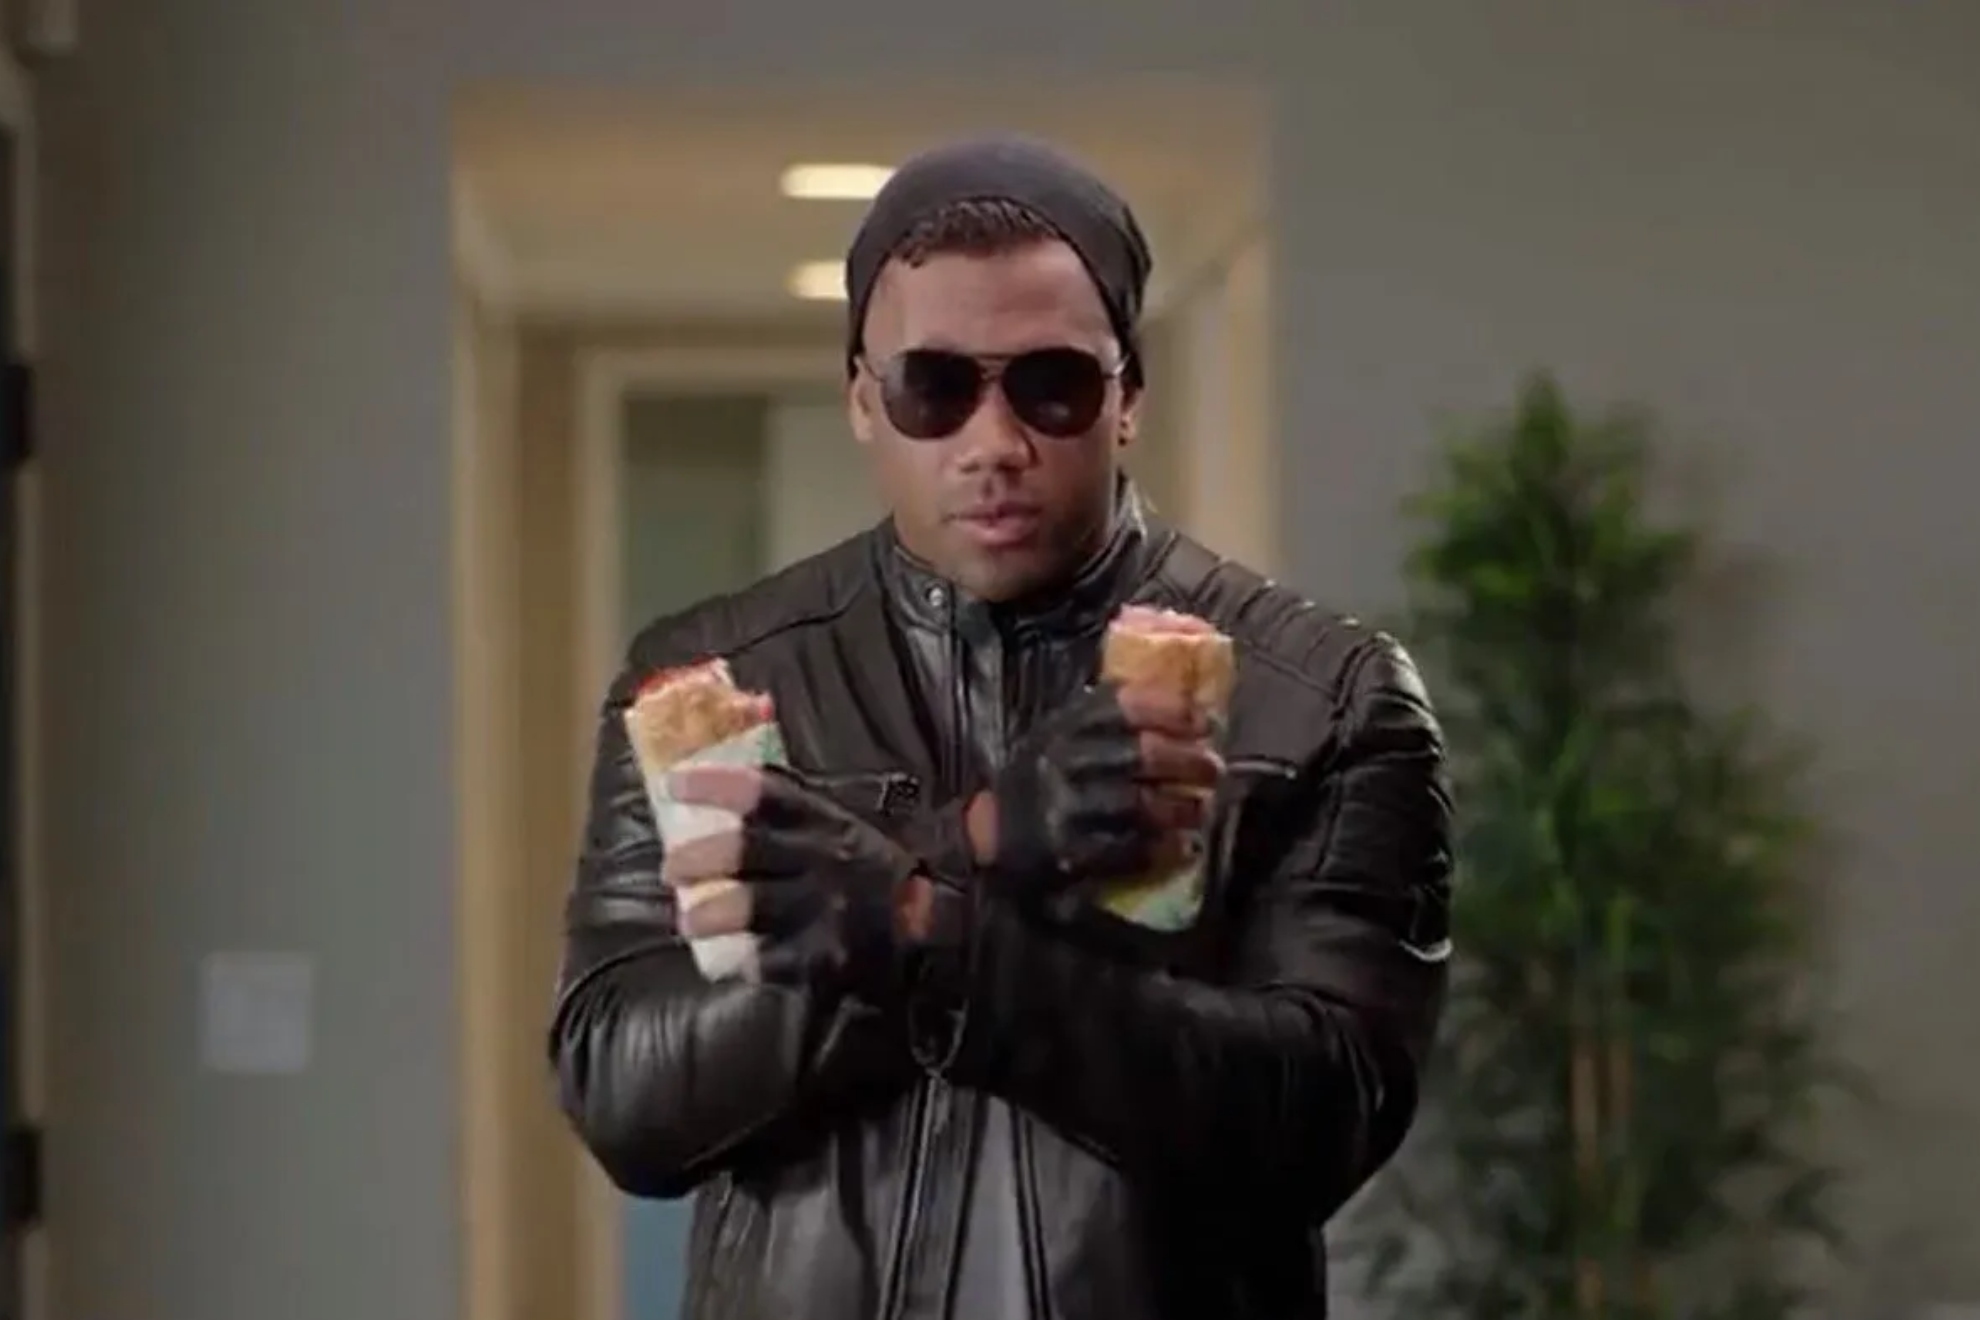 Russell Wilson's 'Dangerwich' sandwich removed from Subway due to